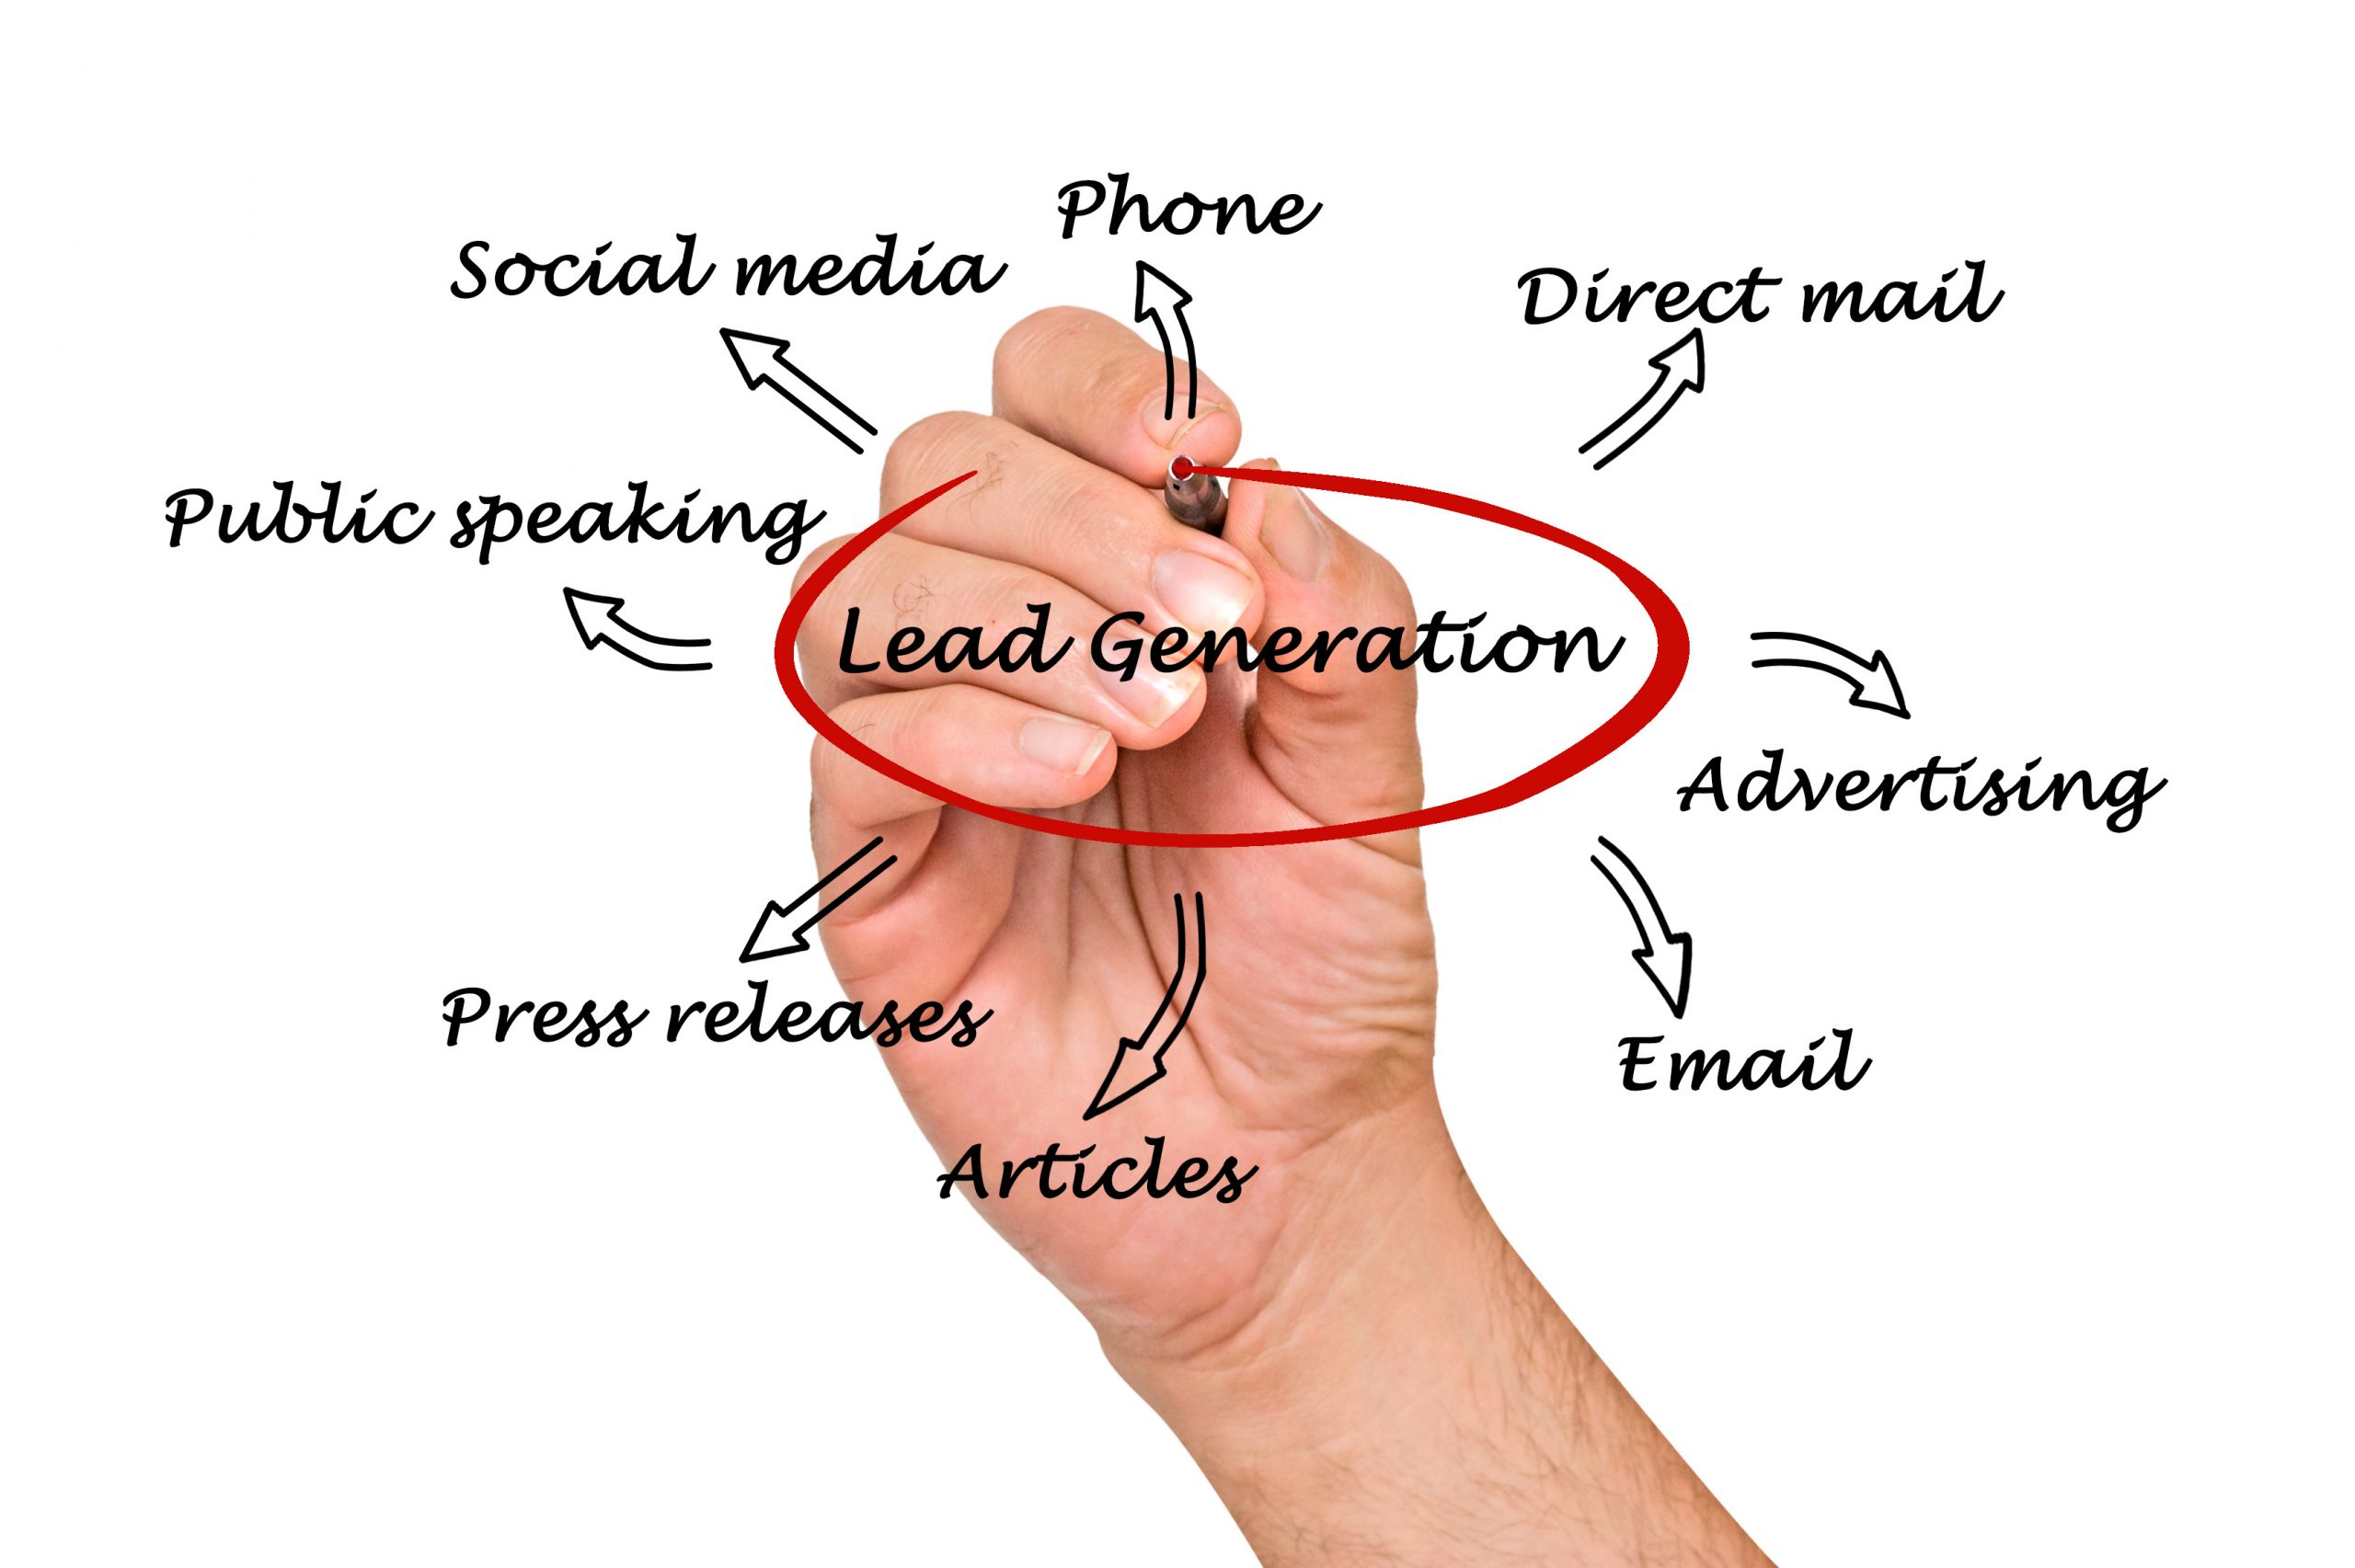 5-lead-generation-issues-most-small-businesses-face-how-to-solve-them